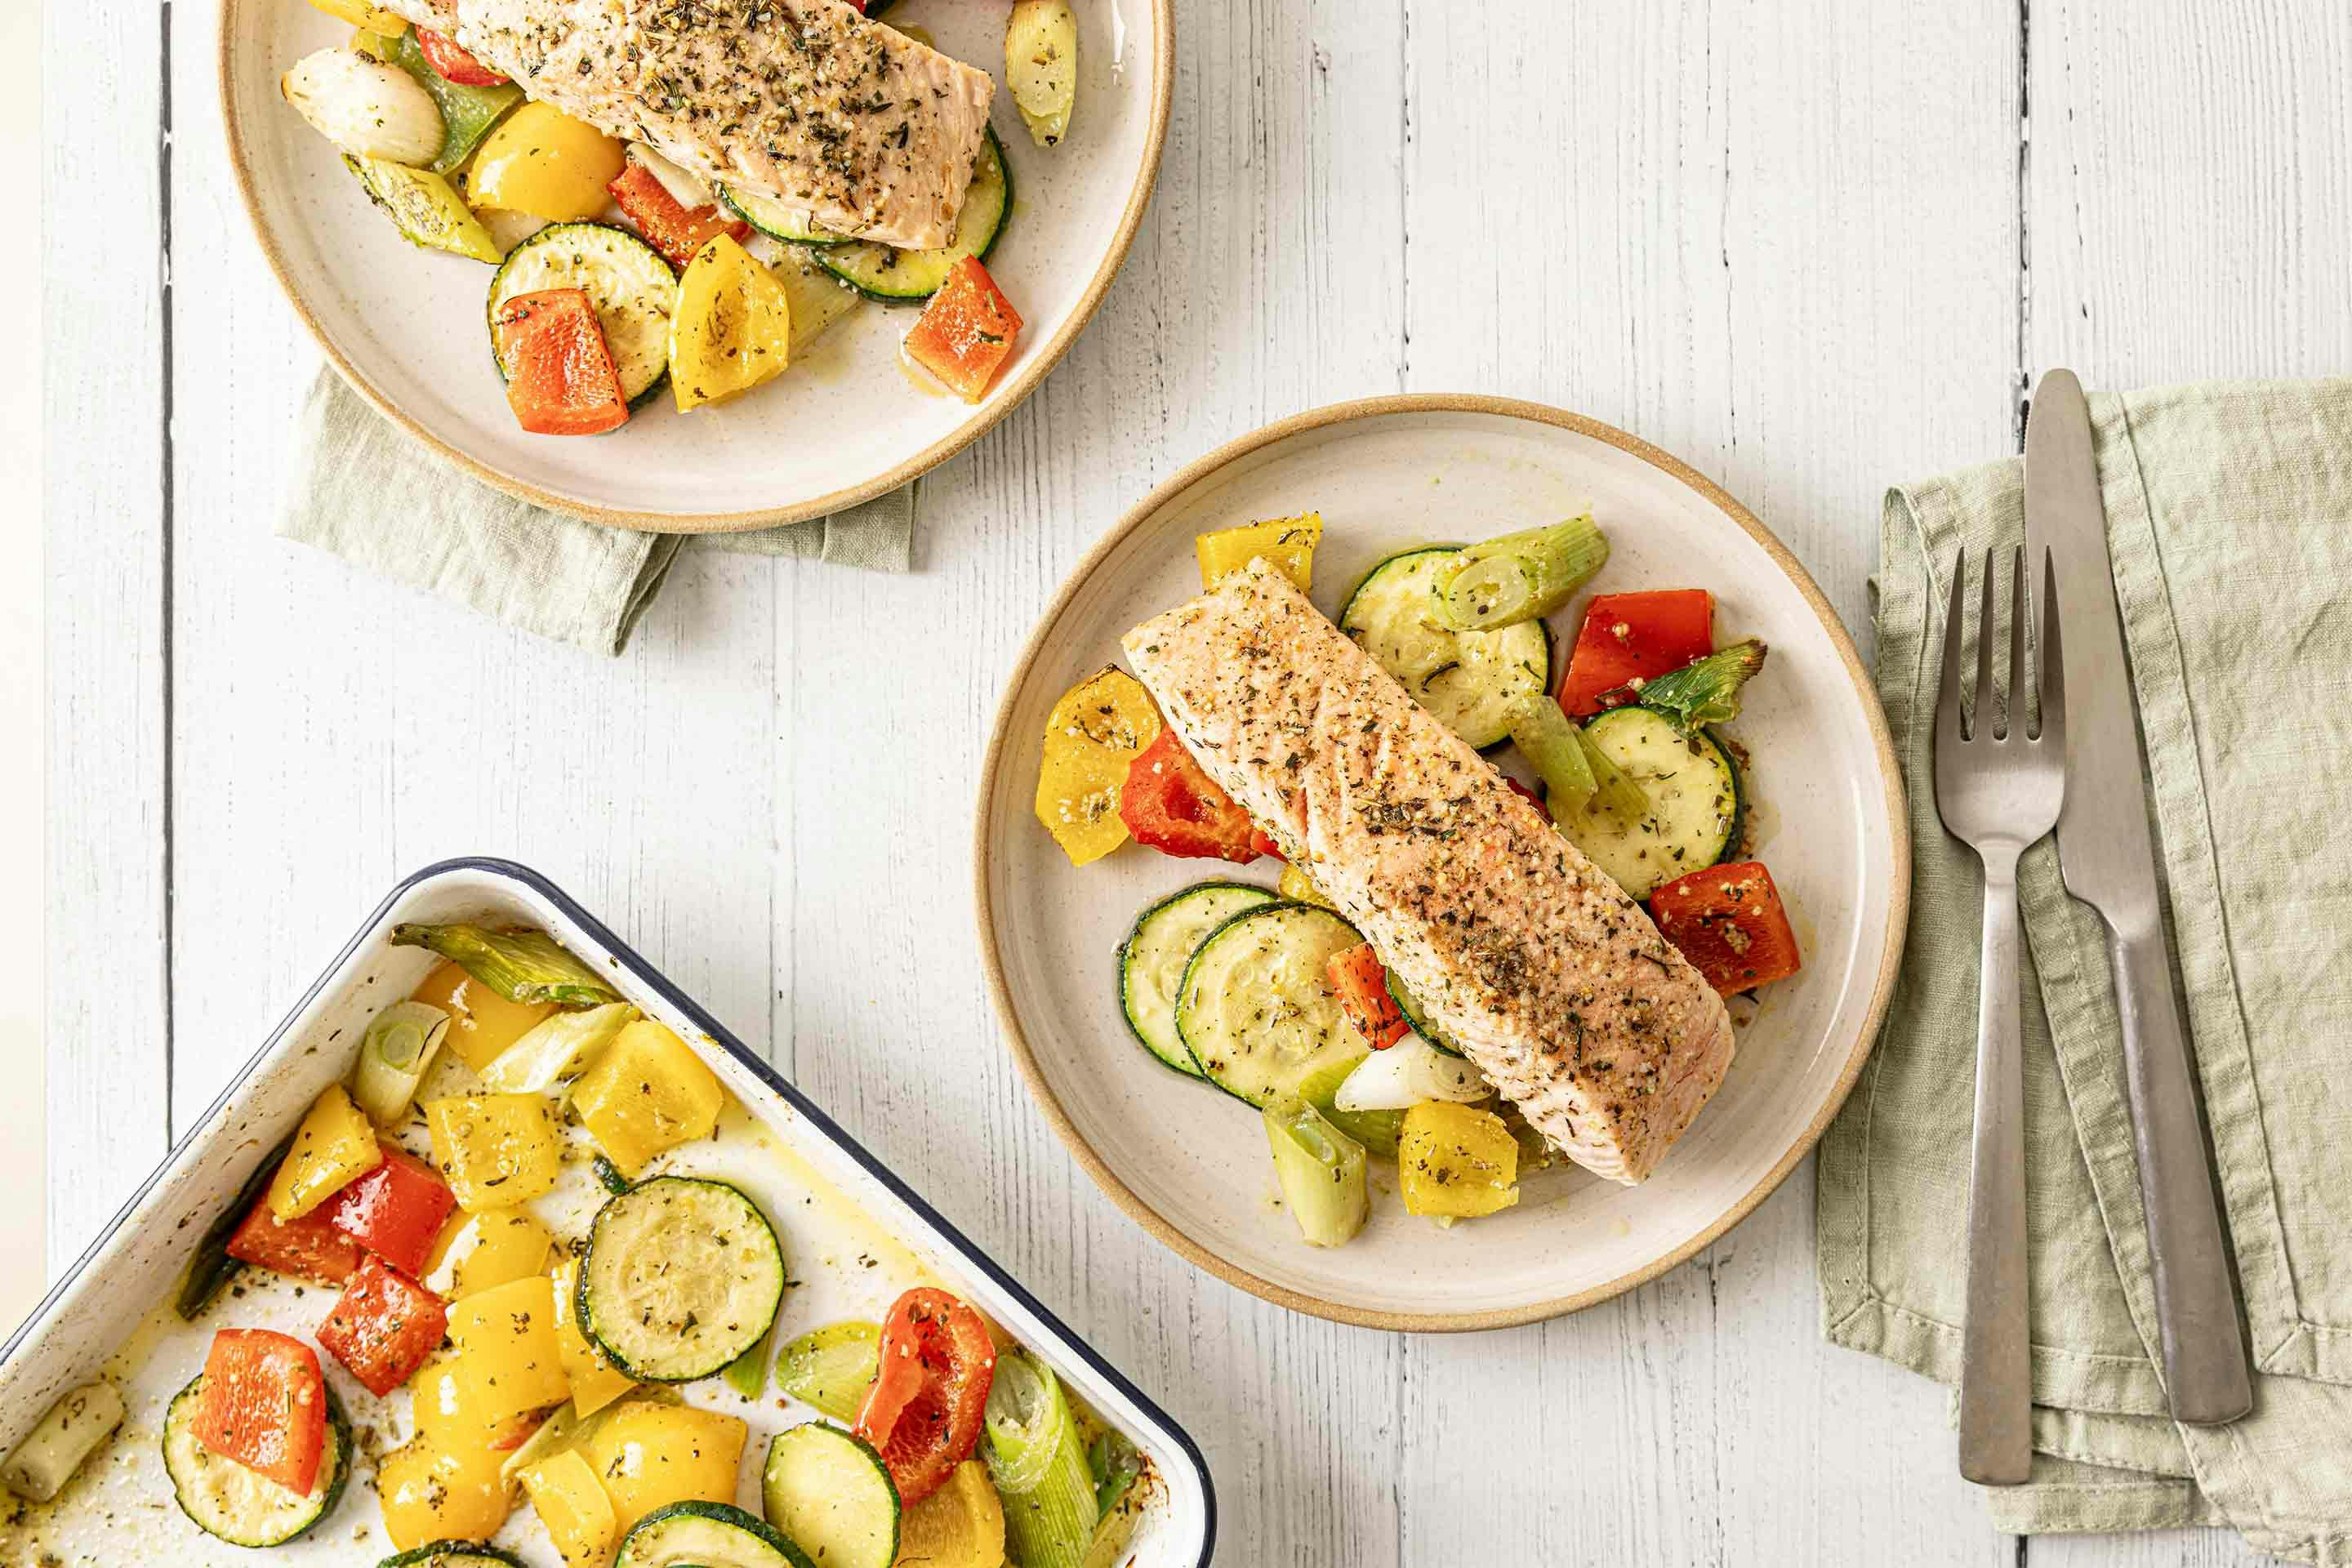 Perfectly tender salmon on roasted vegetables refined with Kotányi spices.